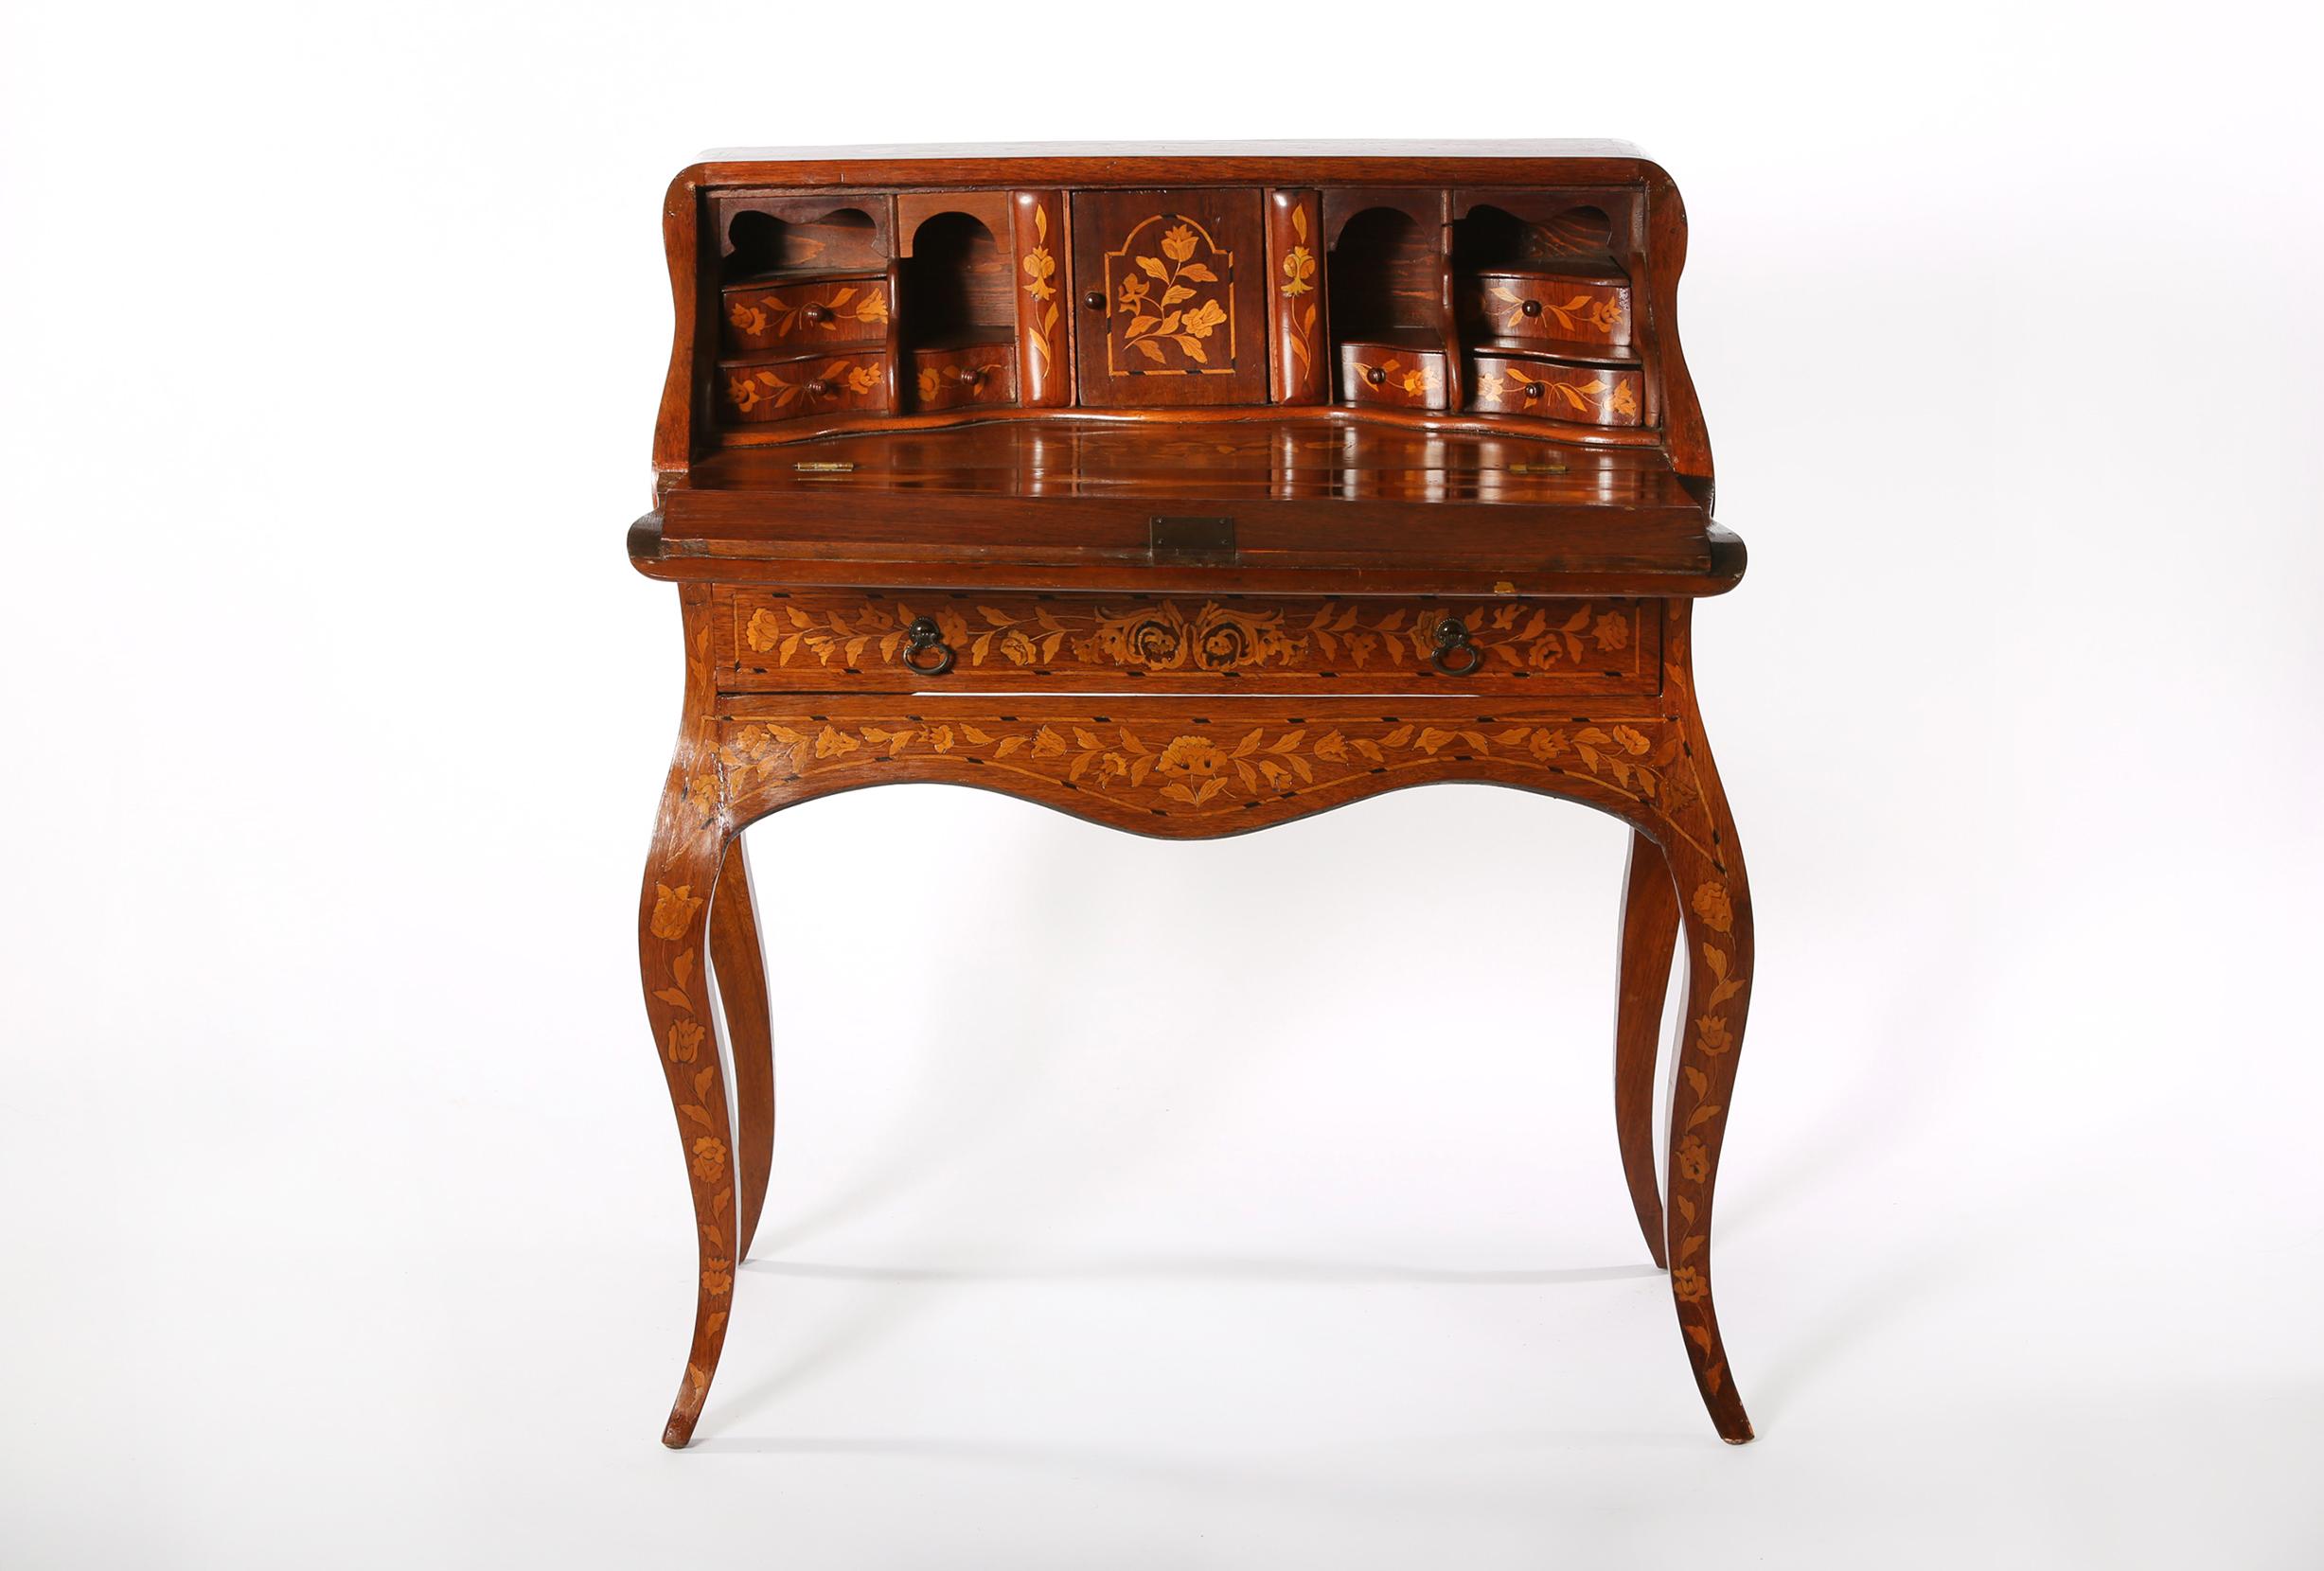 Early 19th century Dutch marquetry slant desk with front drawer. The desk is in good antique condition with wear appropriate to age / use. The desk stand on nicely done cabriole legs and measure about 41 inches high x 36 inches wide x 18.5 inches